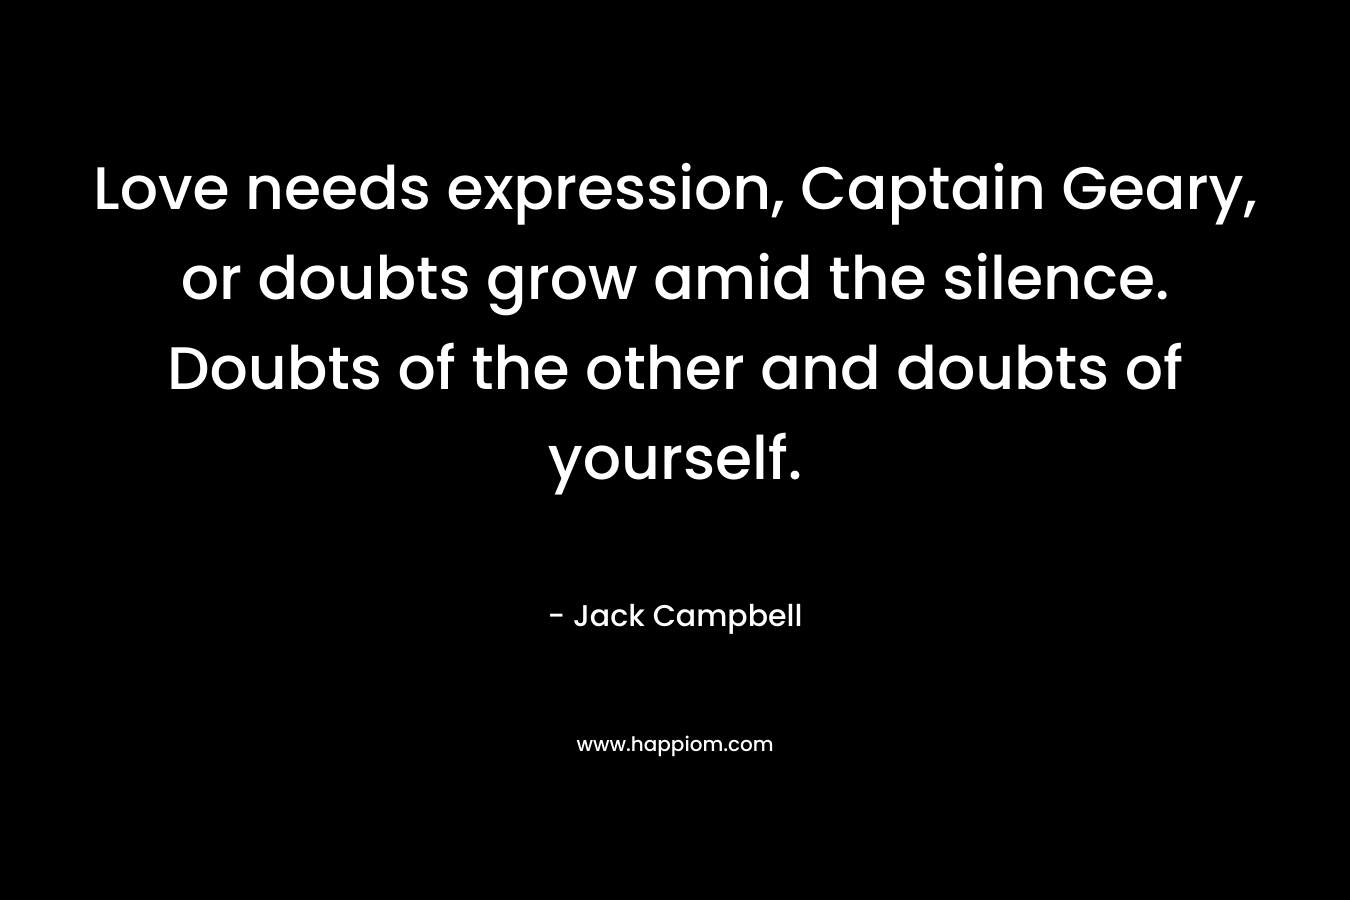 Love needs expression, Captain Geary, or doubts grow amid the silence. Doubts of the other and doubts of yourself. – Jack Campbell